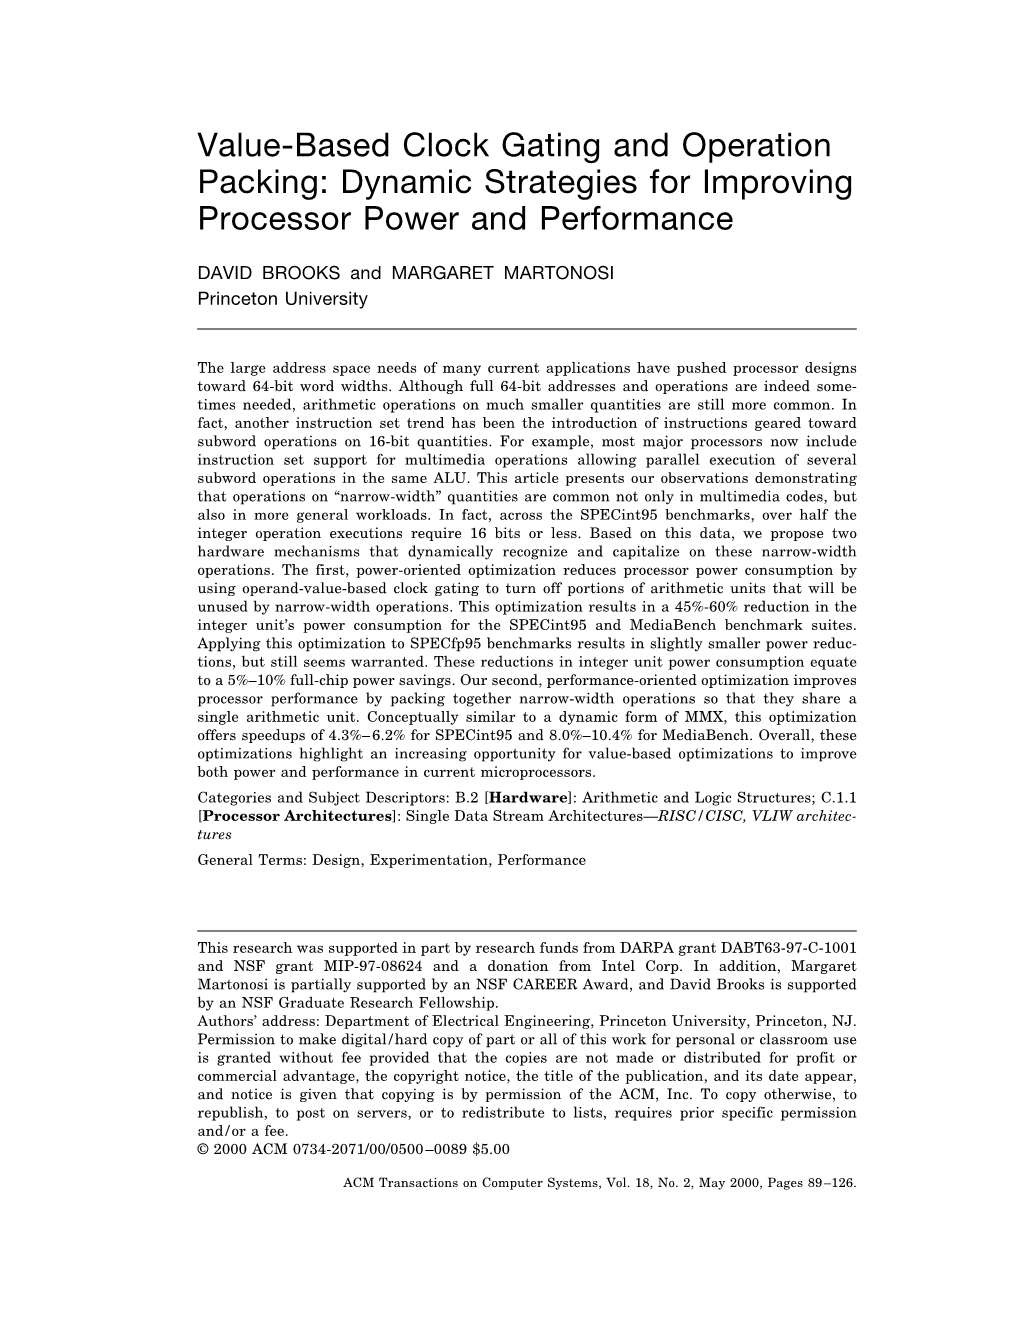 Value-Based Clock Gating and Operation Packing: Dynamic Strategies for Improving Processor Power and Performance